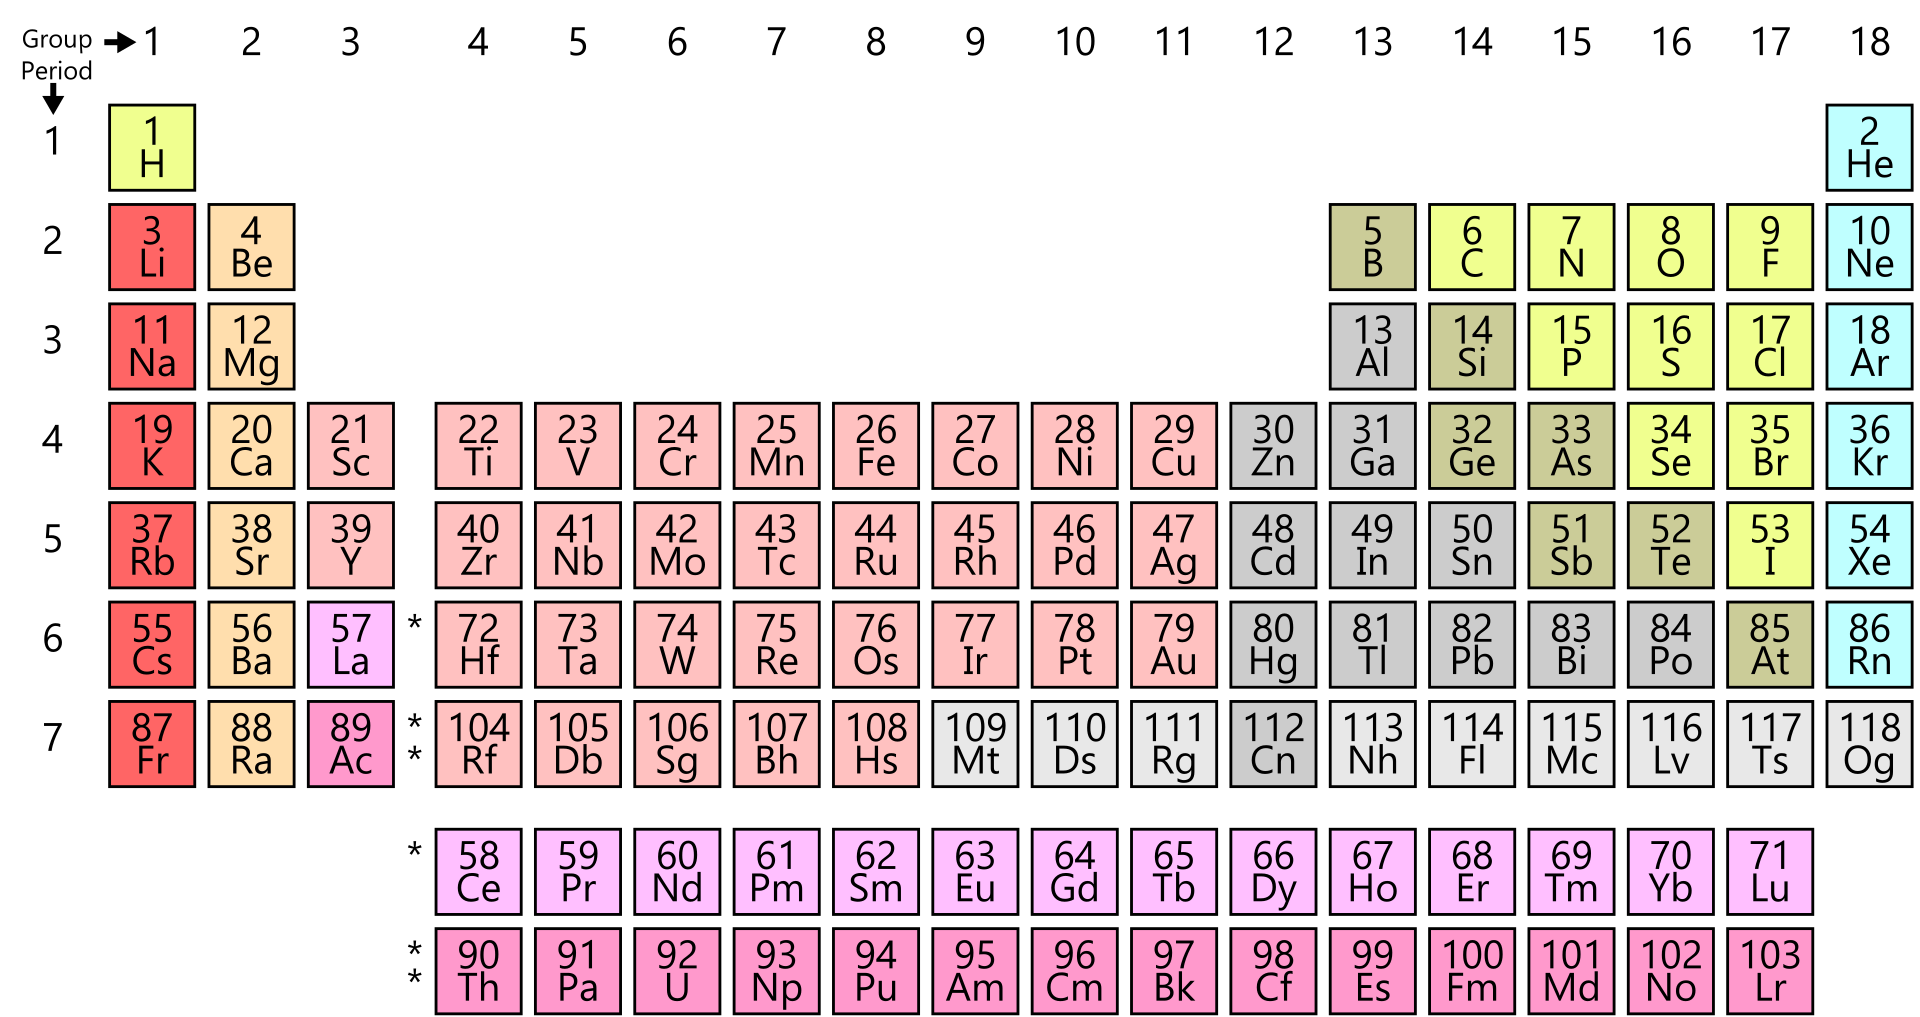 kids science periodic table of elements